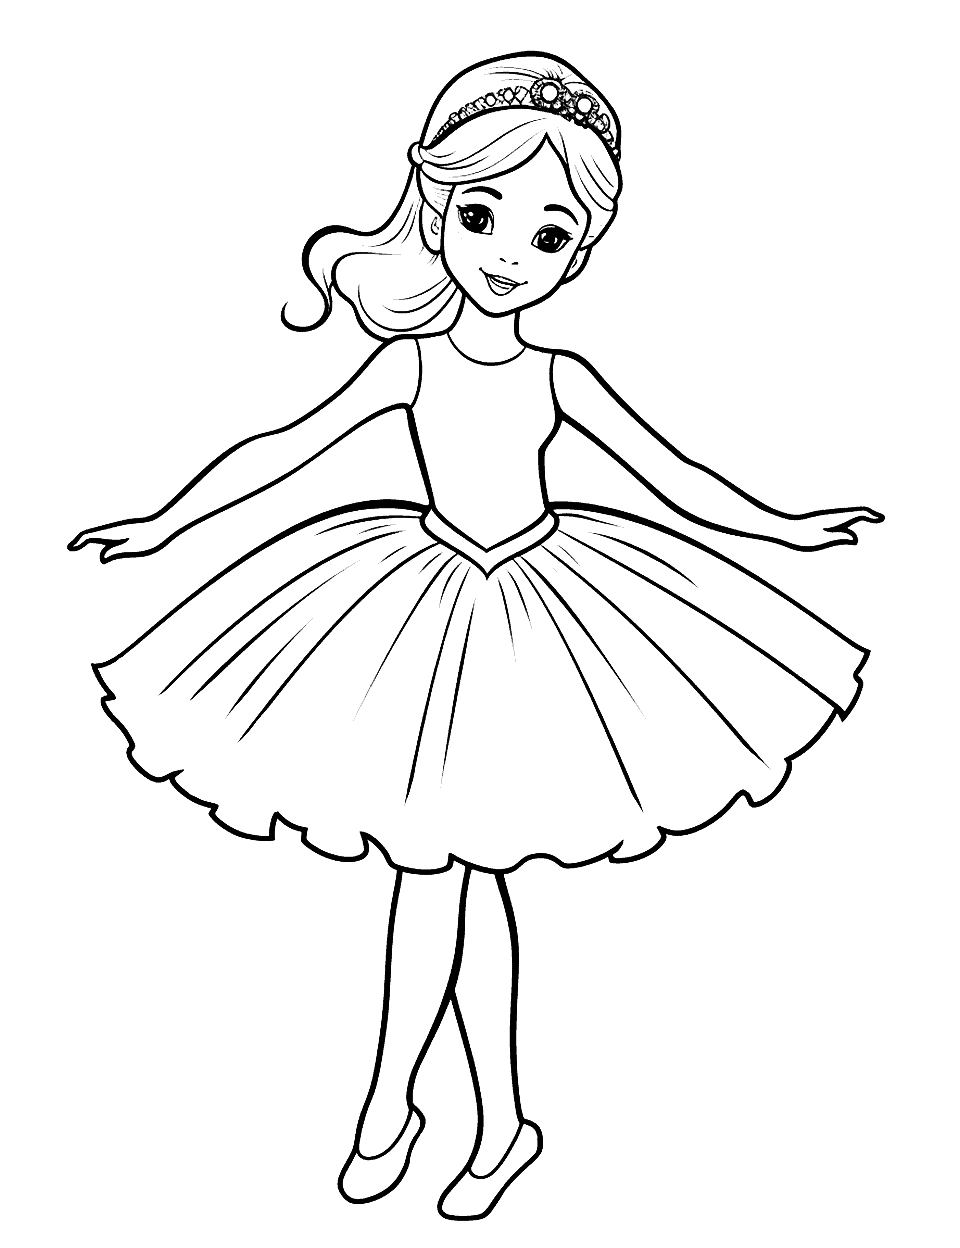 Anime Style Ballerina Coloring Page - A ballerina drawn in a cute, anime art style.